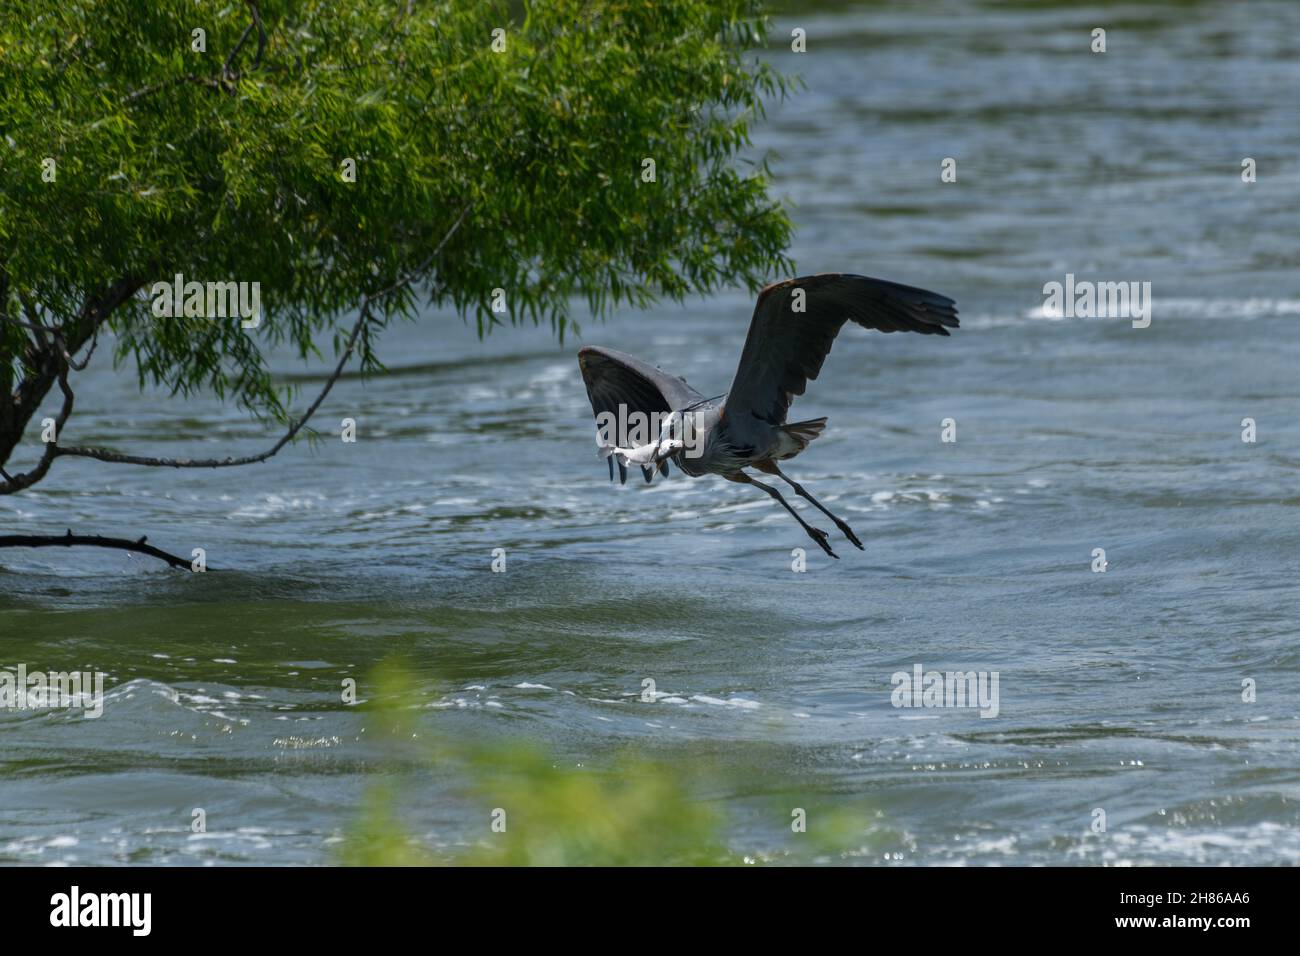 Great Blue Heron (Ardea herodias) flying above water with fish in its mouth. Stock Photo